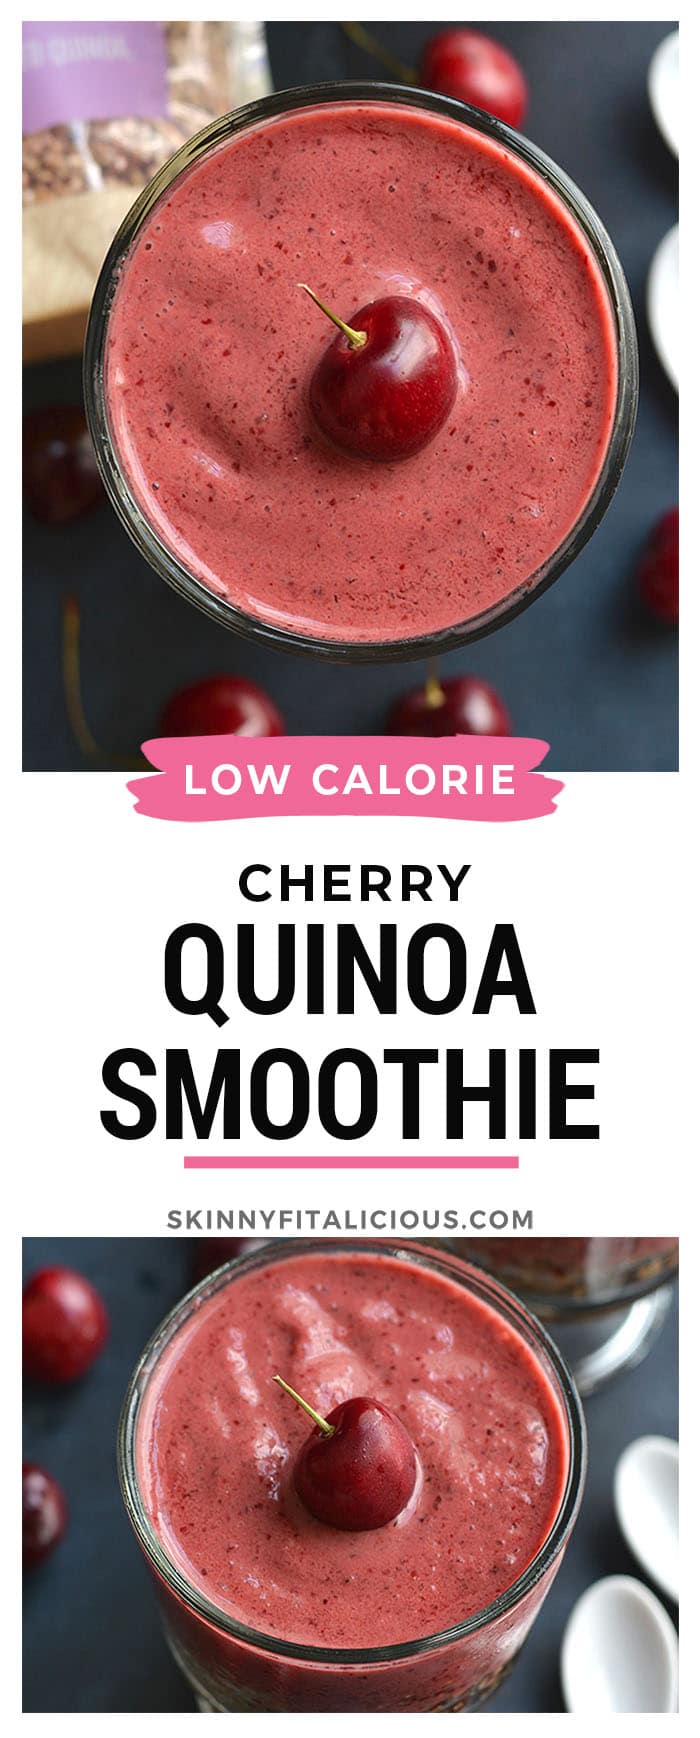 This Cherry Quinoa Smoothie is layered with quinoa and topped with a cherry smoothie. Mix the two together for a crunchy protein-packed breakfast!